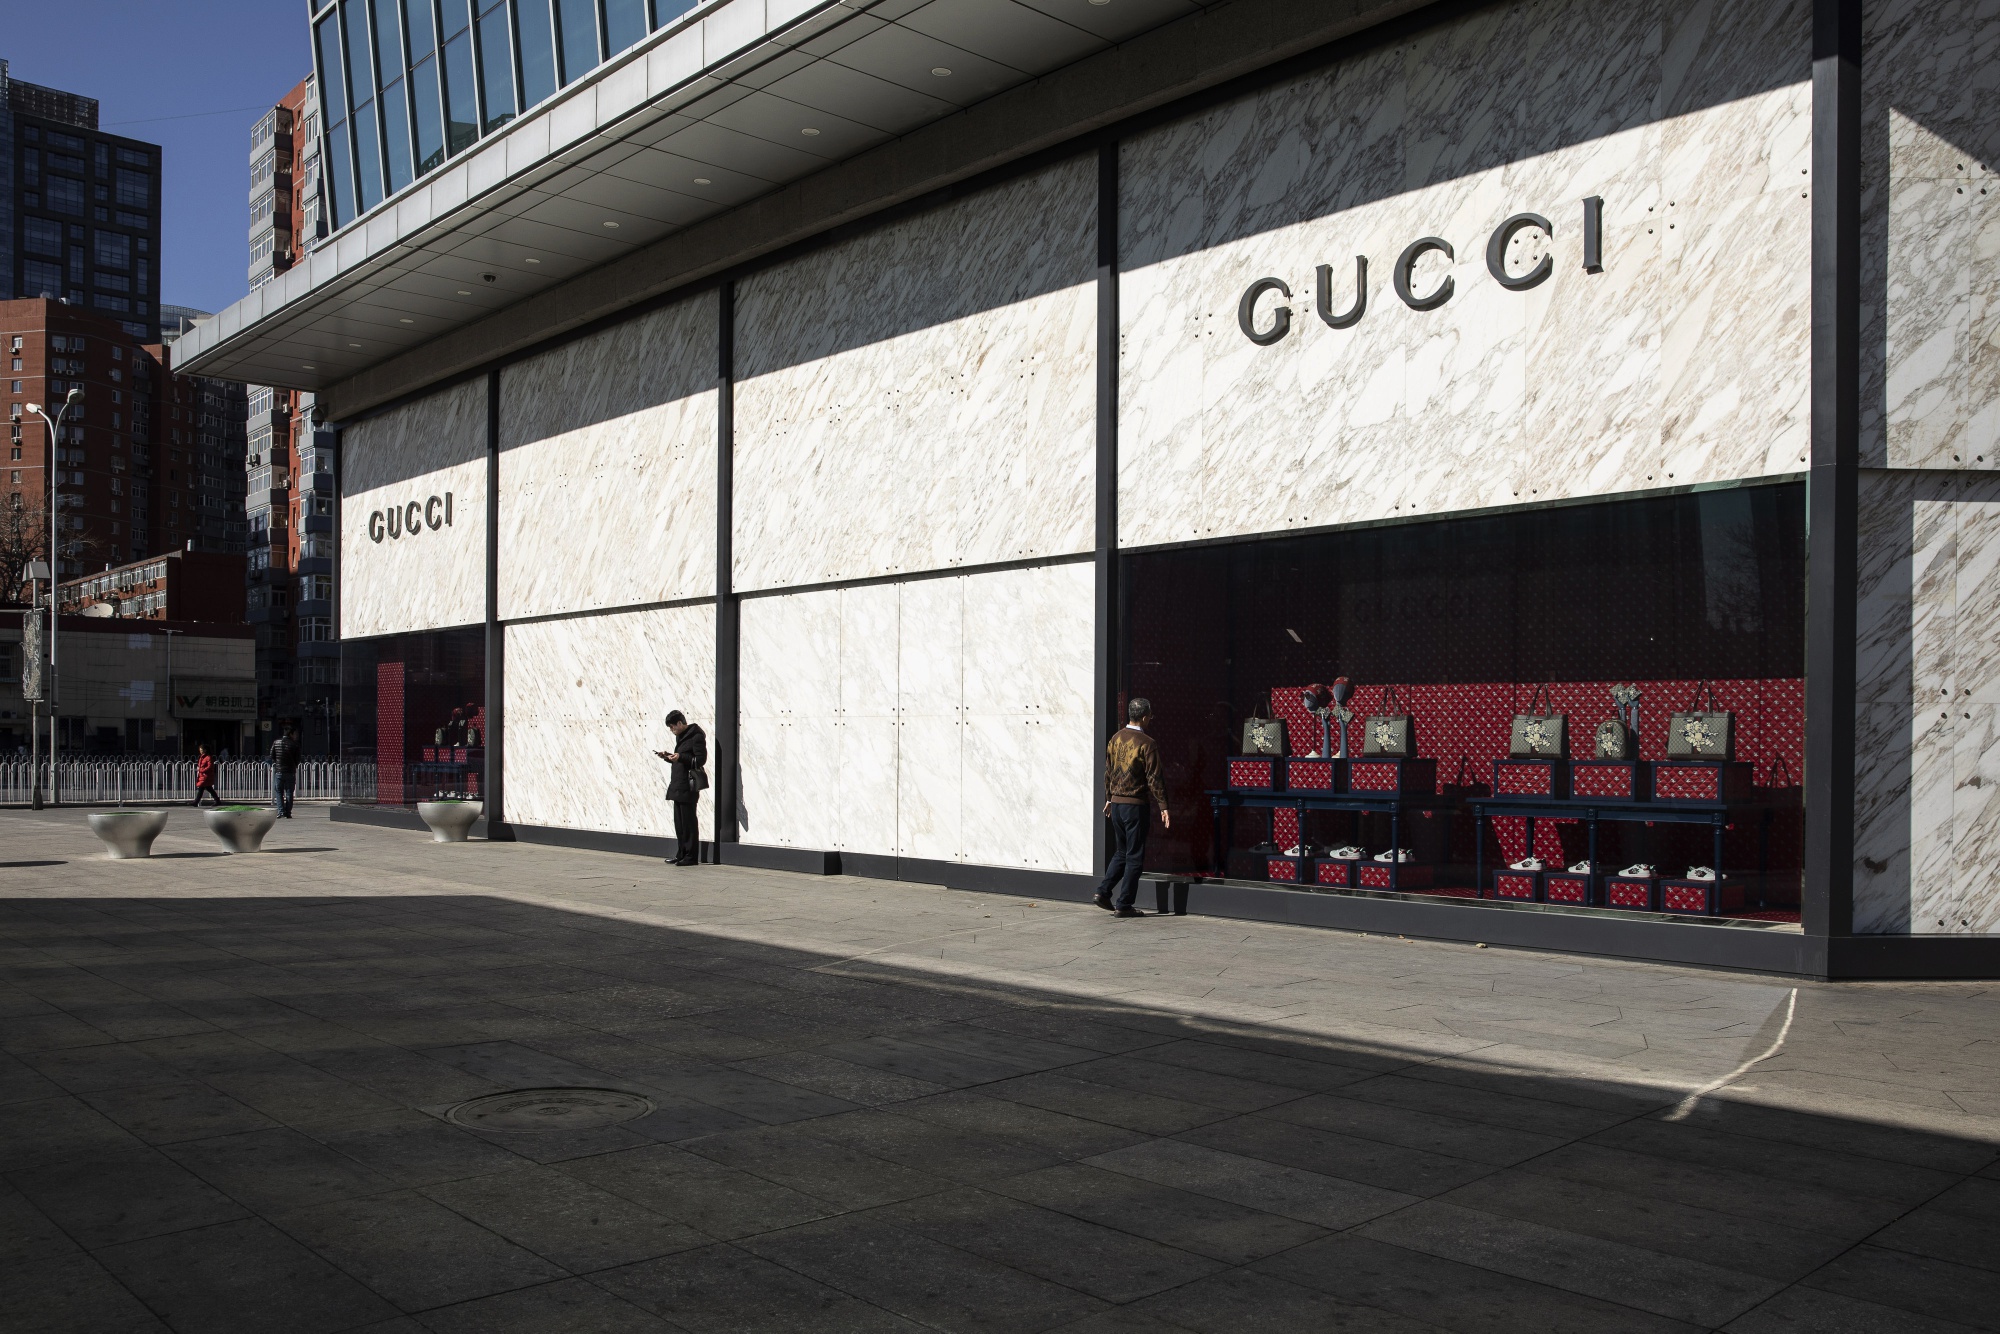 What makes brands like Gucci and Louis Vuitton so popular, even though it's  expensive? - Quora